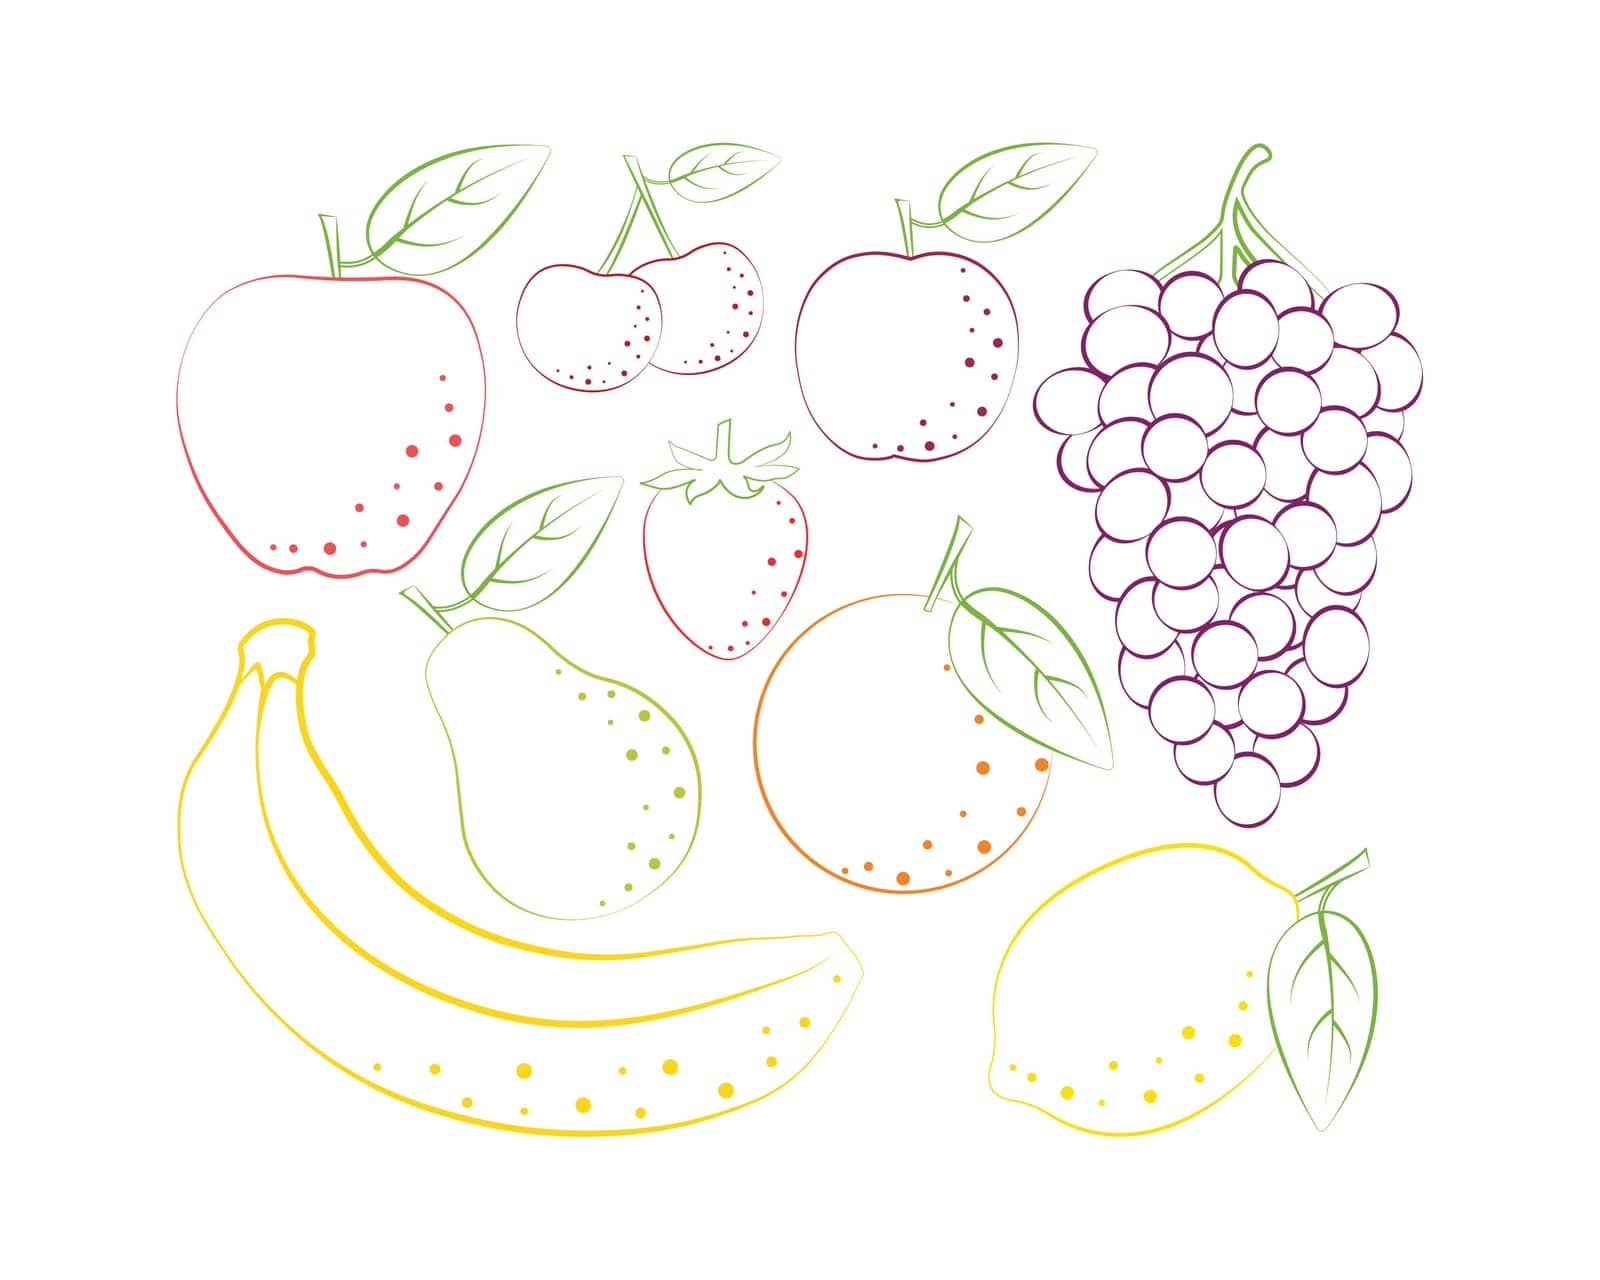 Fruit coloring book. Children coloring book featuring fruits such as apple, plum, cherry and strawberry, as well as grapes, pears and bananas. Tropical fruits coloring book. Banana, orange and lemon by NastyaN